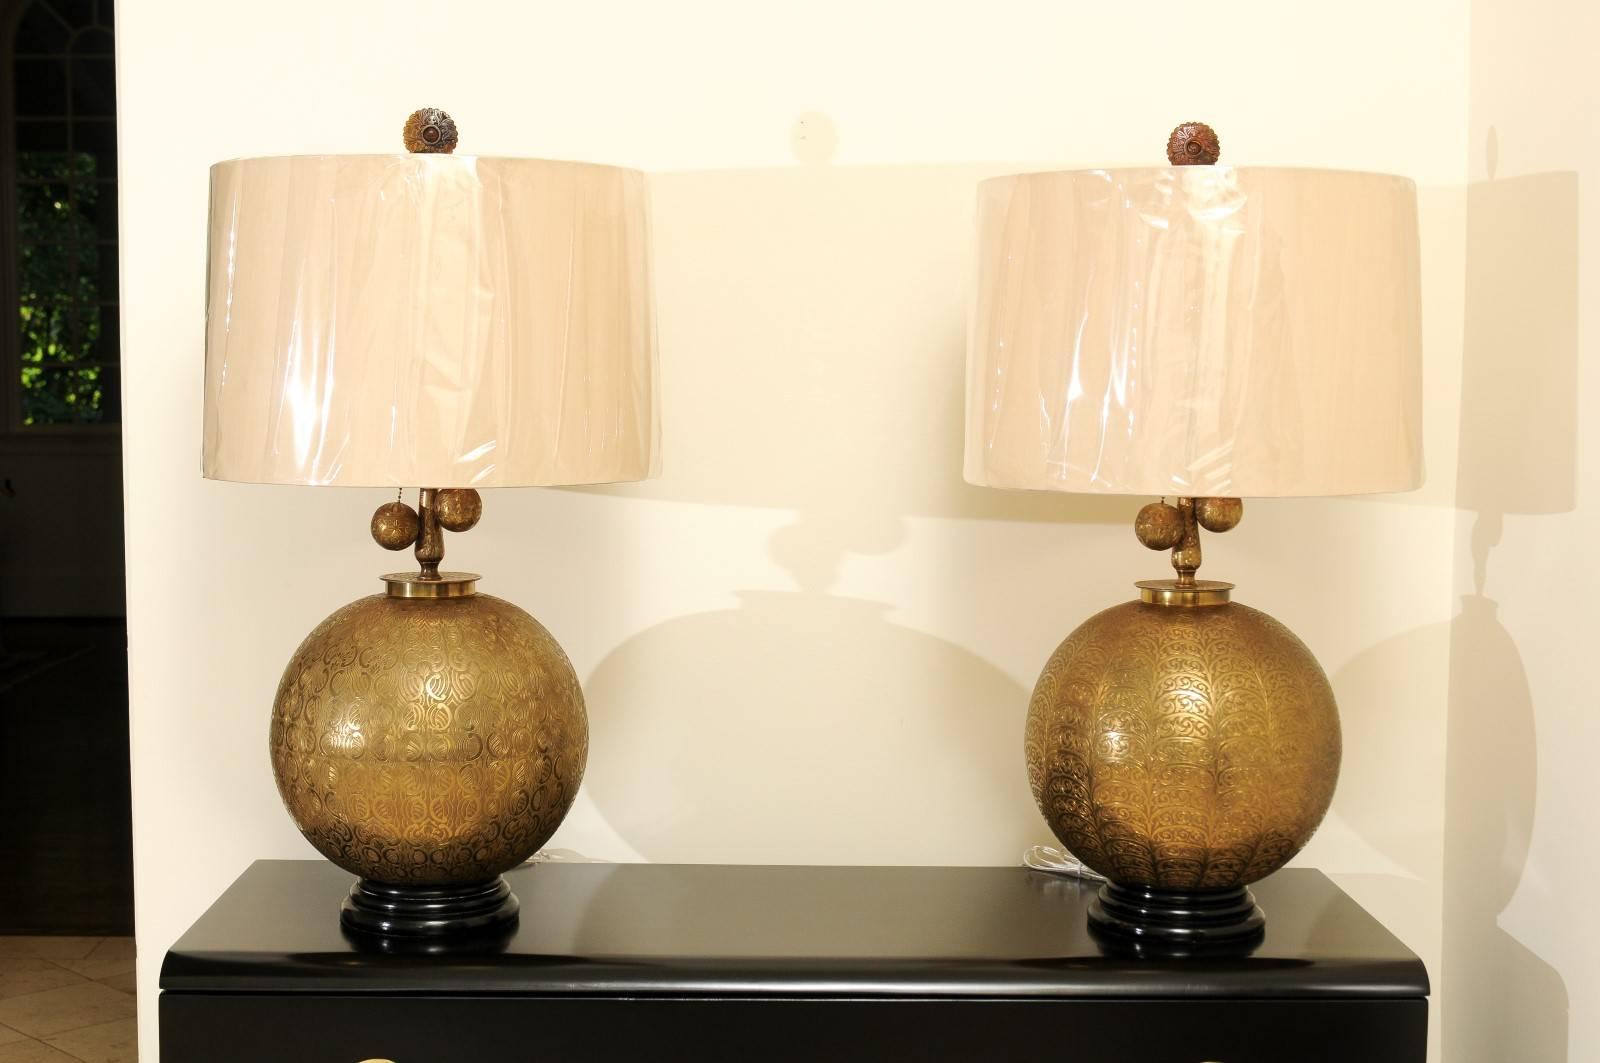 An exquisite pair of vintage brass sphere lamps, circa 1960. Hand-forged and etched brass form with fabulous scale and detail. Custom carved mahogany base finished in black lacquer. The pieces display slightly different embossed patterns. The